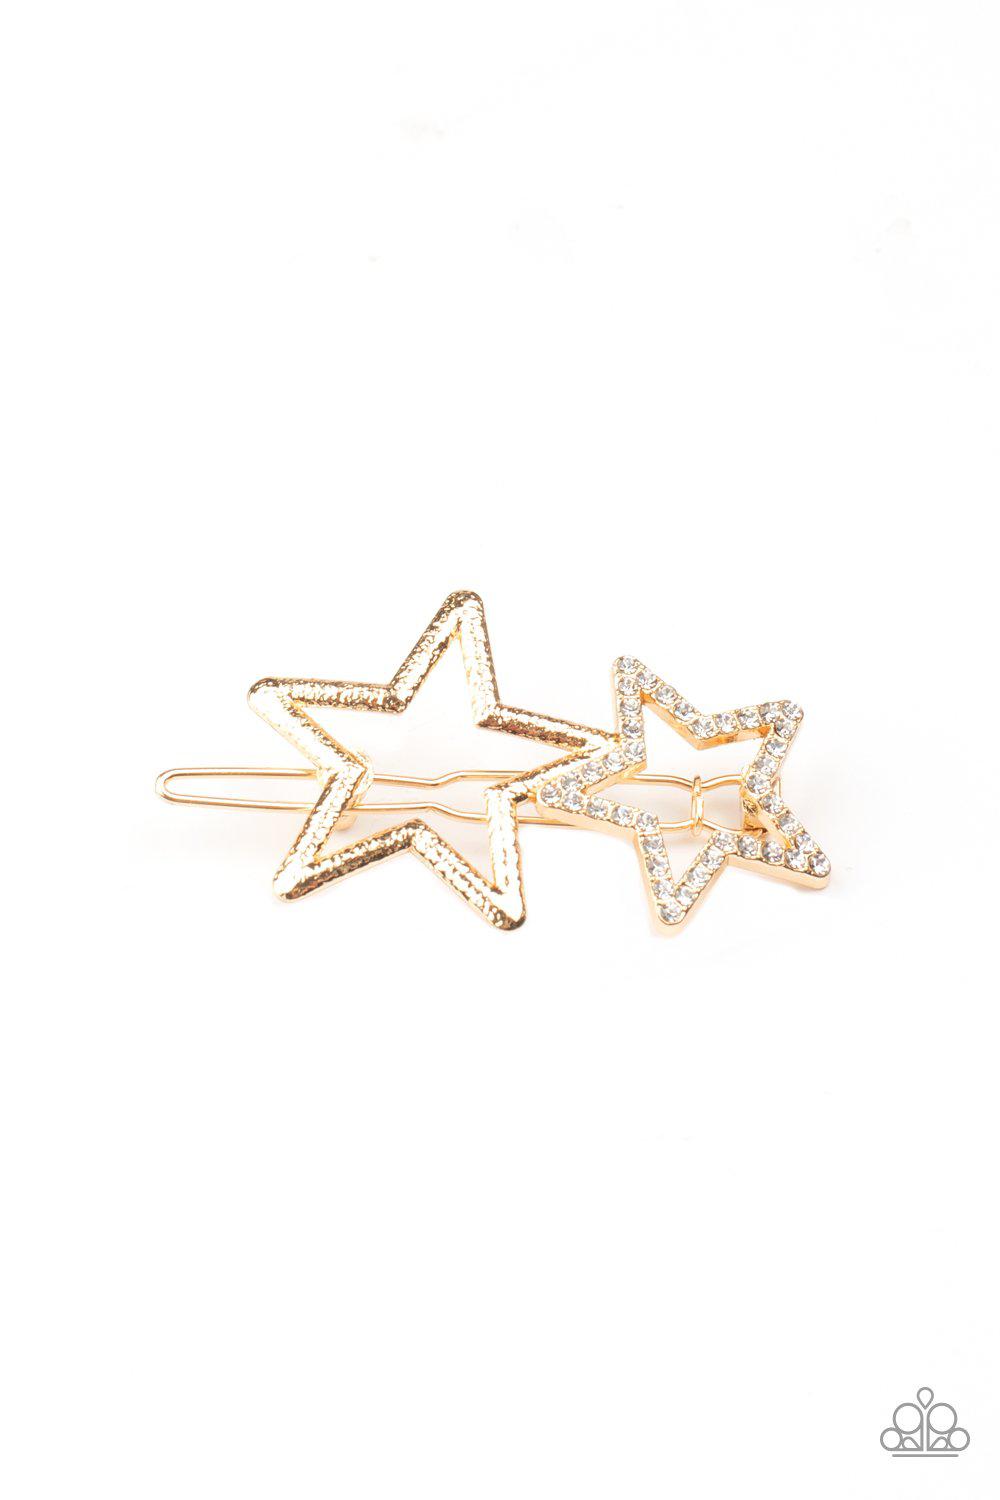 Let's Get This Party STAR-ted! Gold Rhinestone Hair Pin - Paparazzi Accessories-CarasShop.com - $5 Jewelry by Cara Jewels